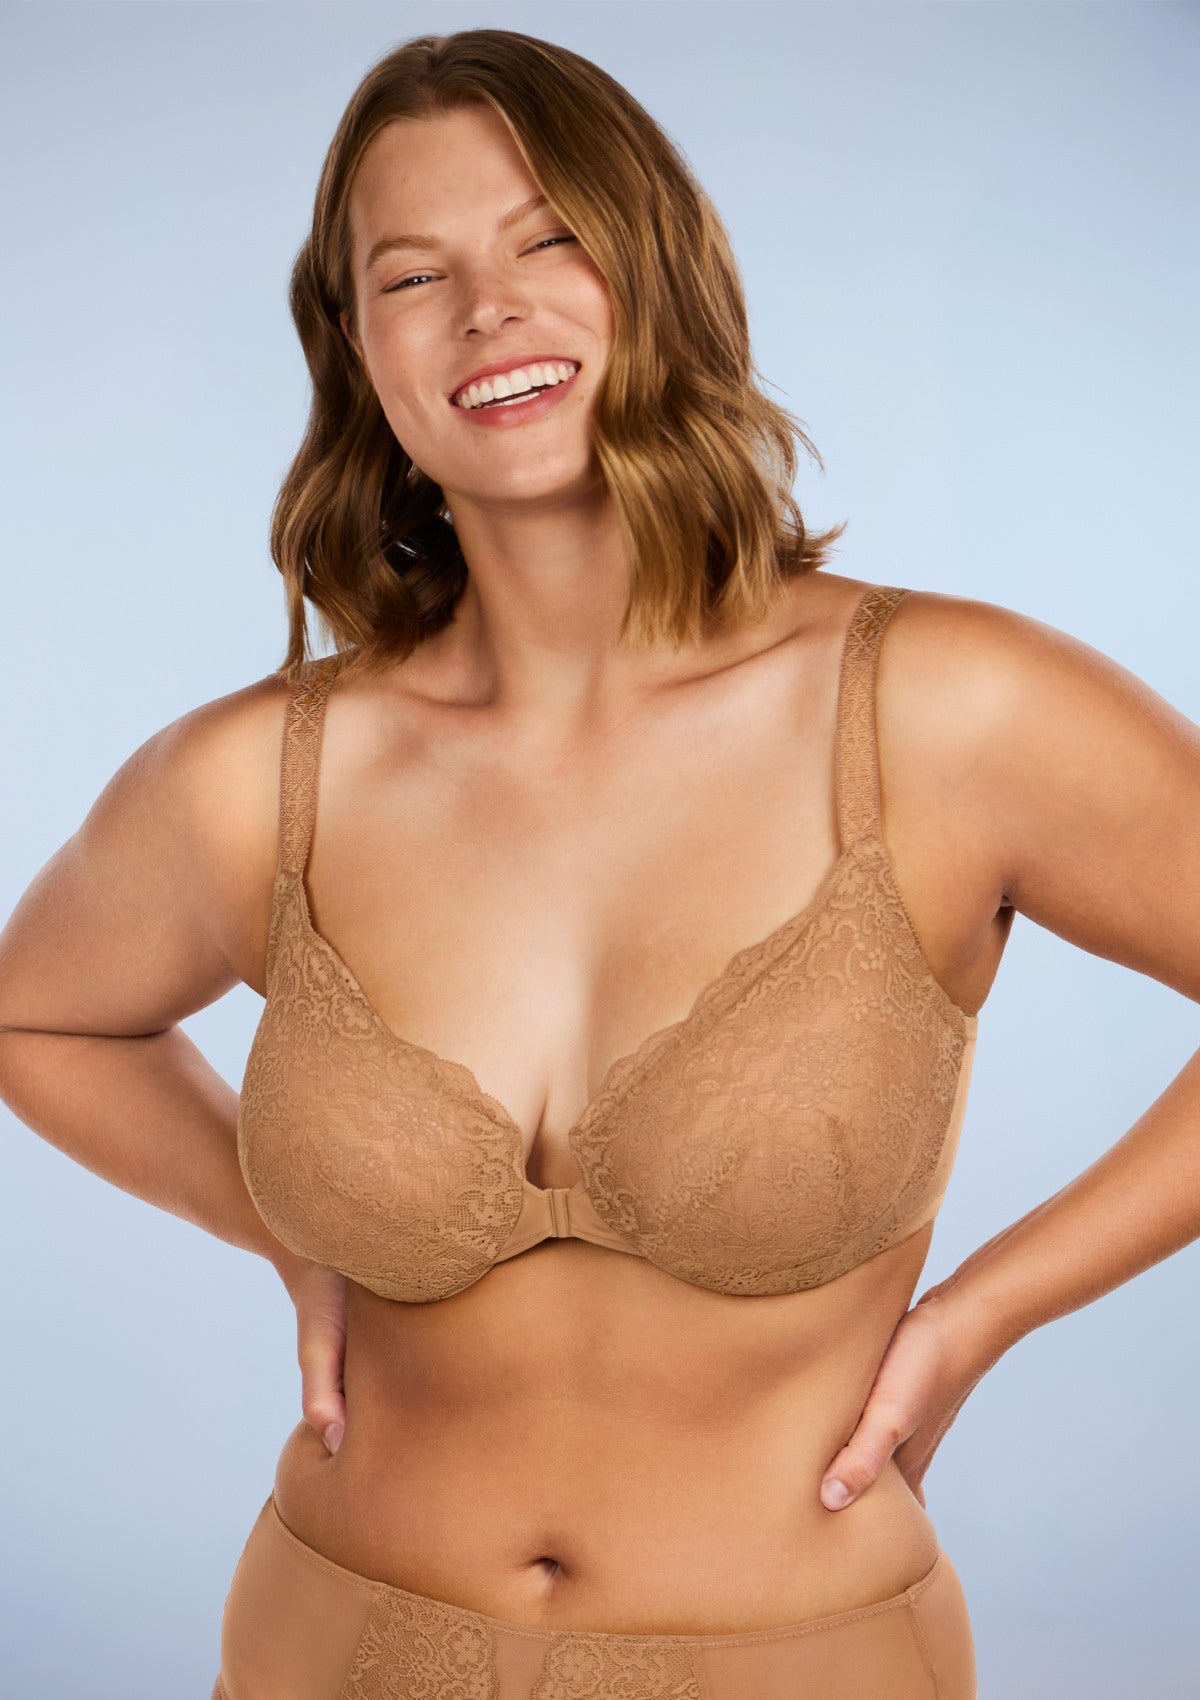 HSIA Nymphaea Easy-to-wear Front-Close Lace Unlined Underwire Bra - Dusty Peach / 38 / C